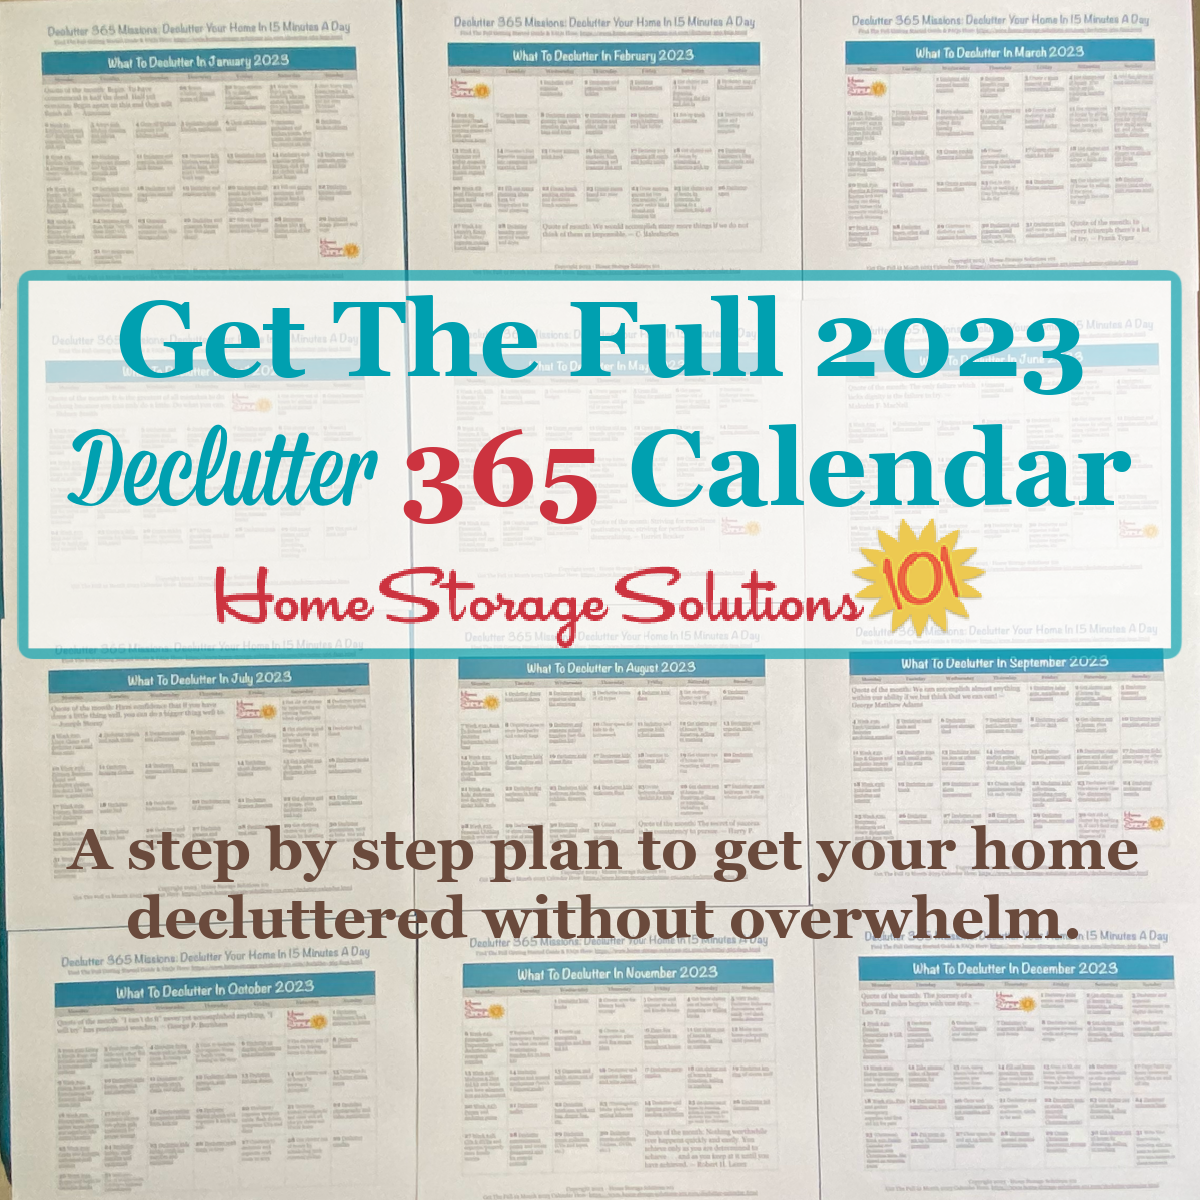 Get the full 2023 Declutter 365 calendar, a step by step plan to get your home decluttered without overwhelm {on Home Storage Solutions 101} #Declutter365 #DeclutteringHome #DeclutterTips